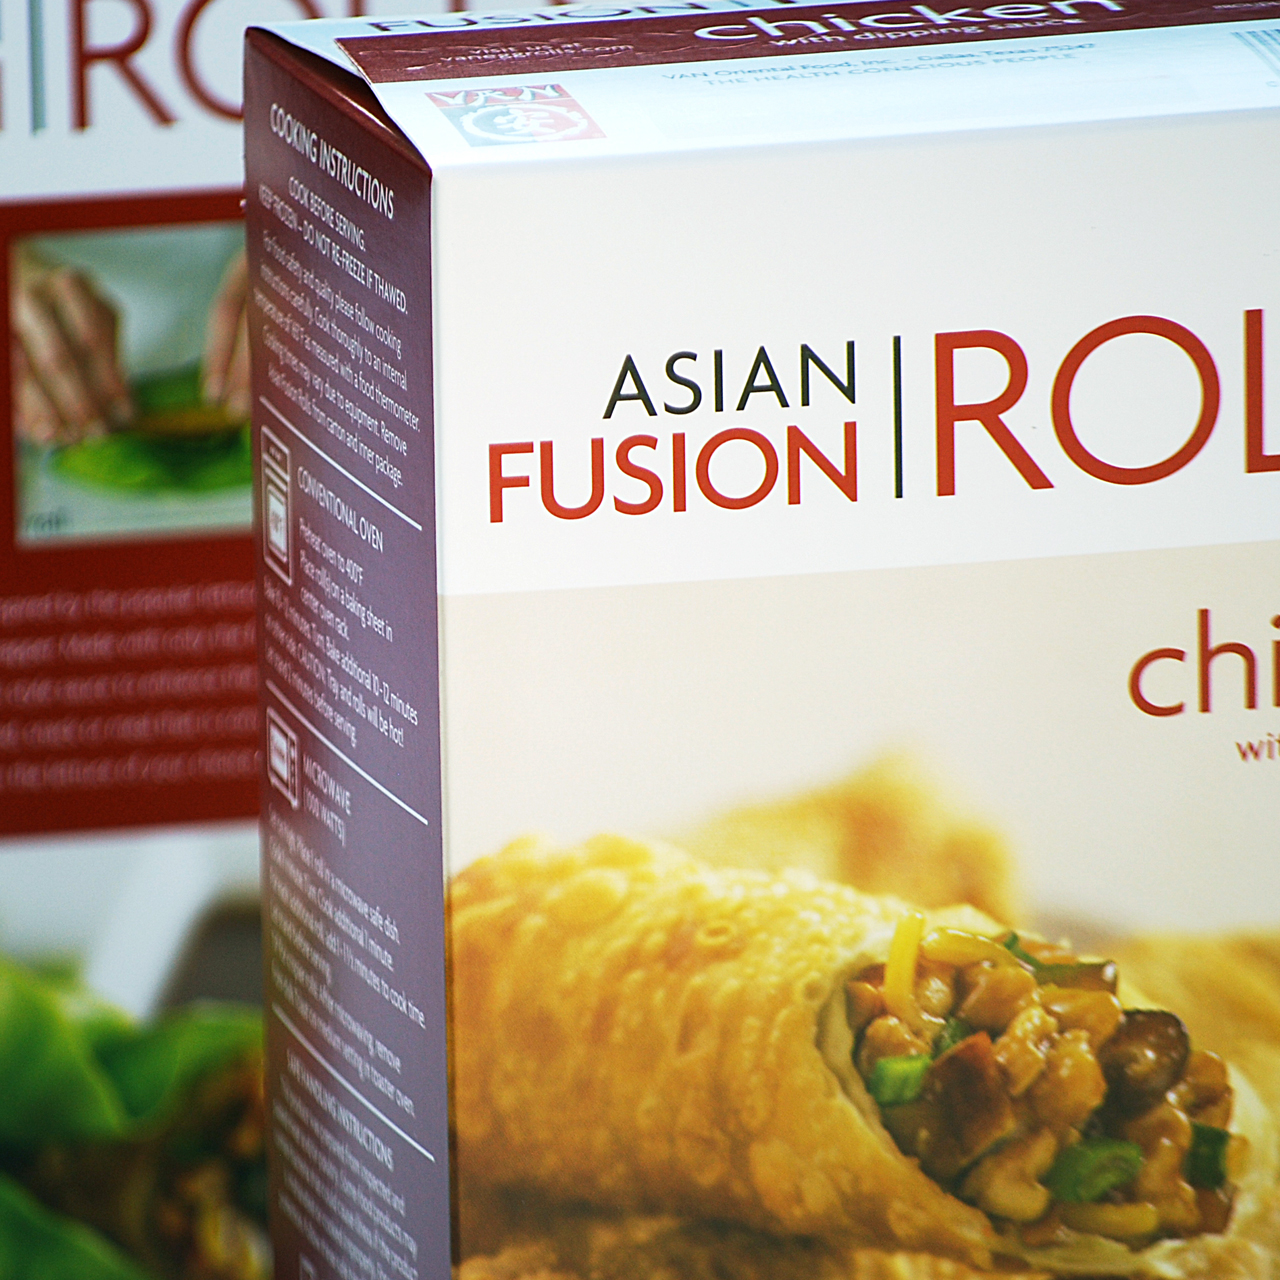 Detail image of Van's Kitchen Asian Fusion Roll's package design